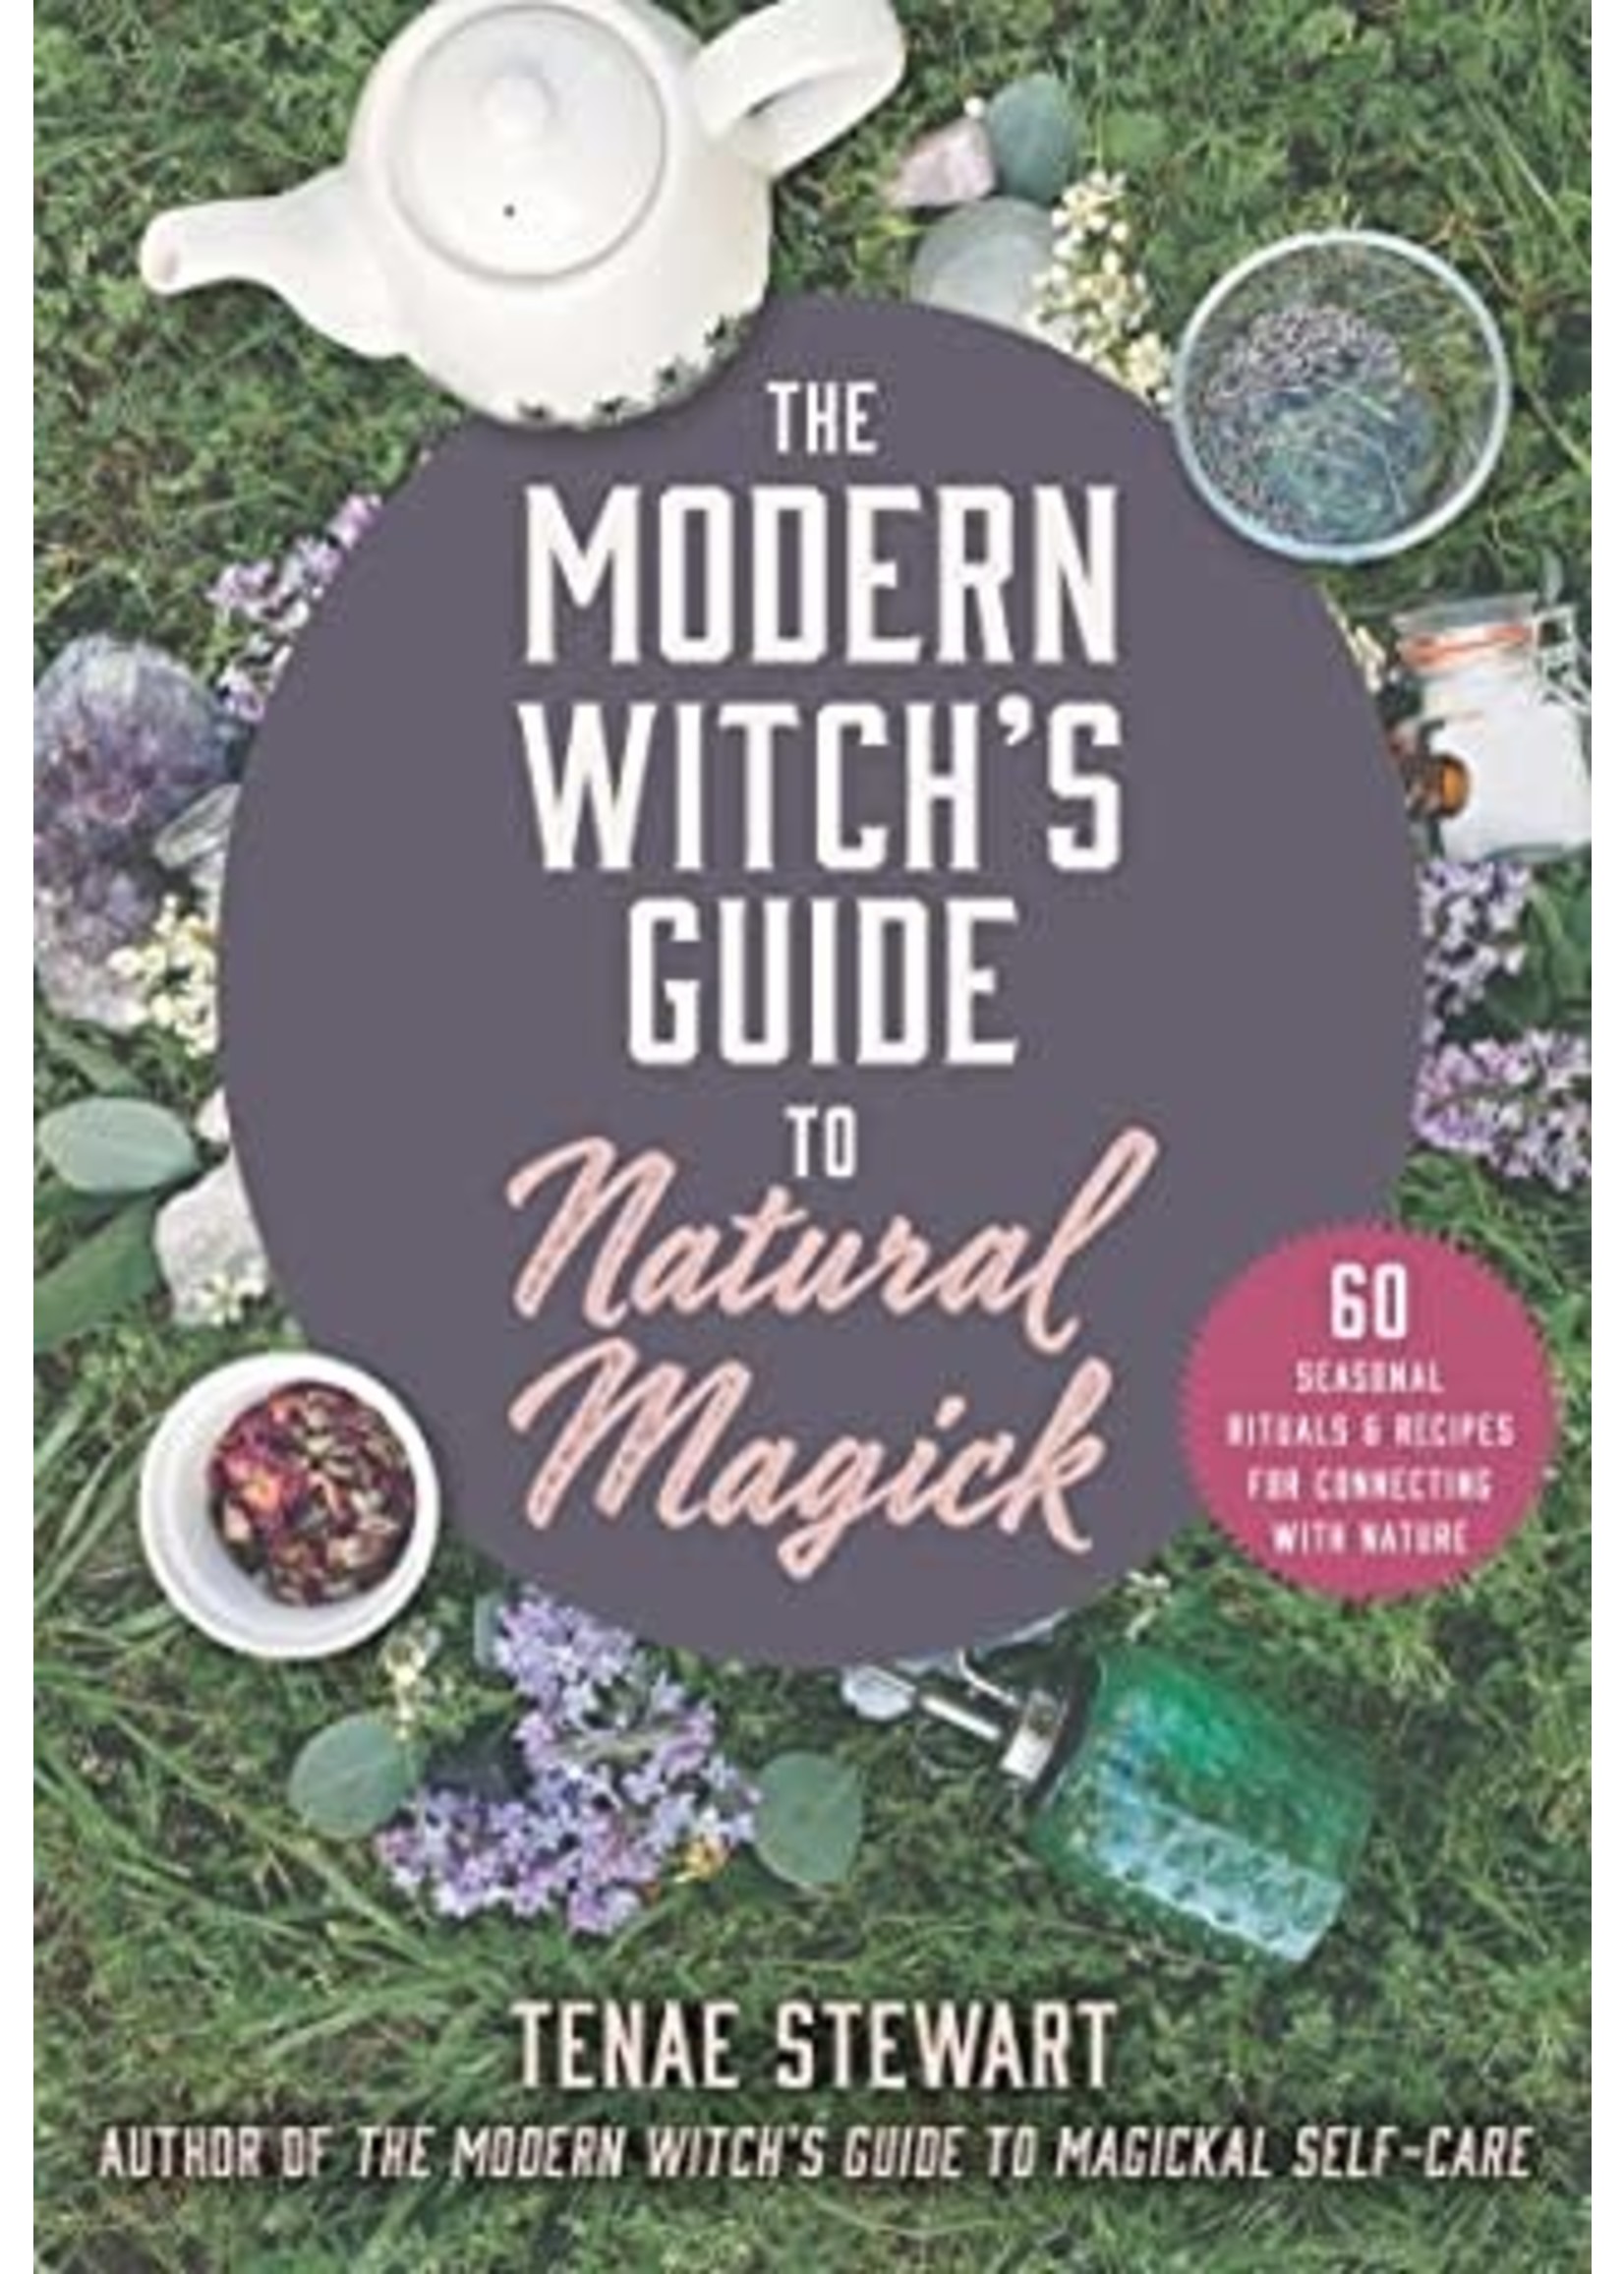 The Modern Witch's Guide to Natural Magick: 60 Seasonal Rituals Recipes for Connecting with Nature by Tenae Stewart